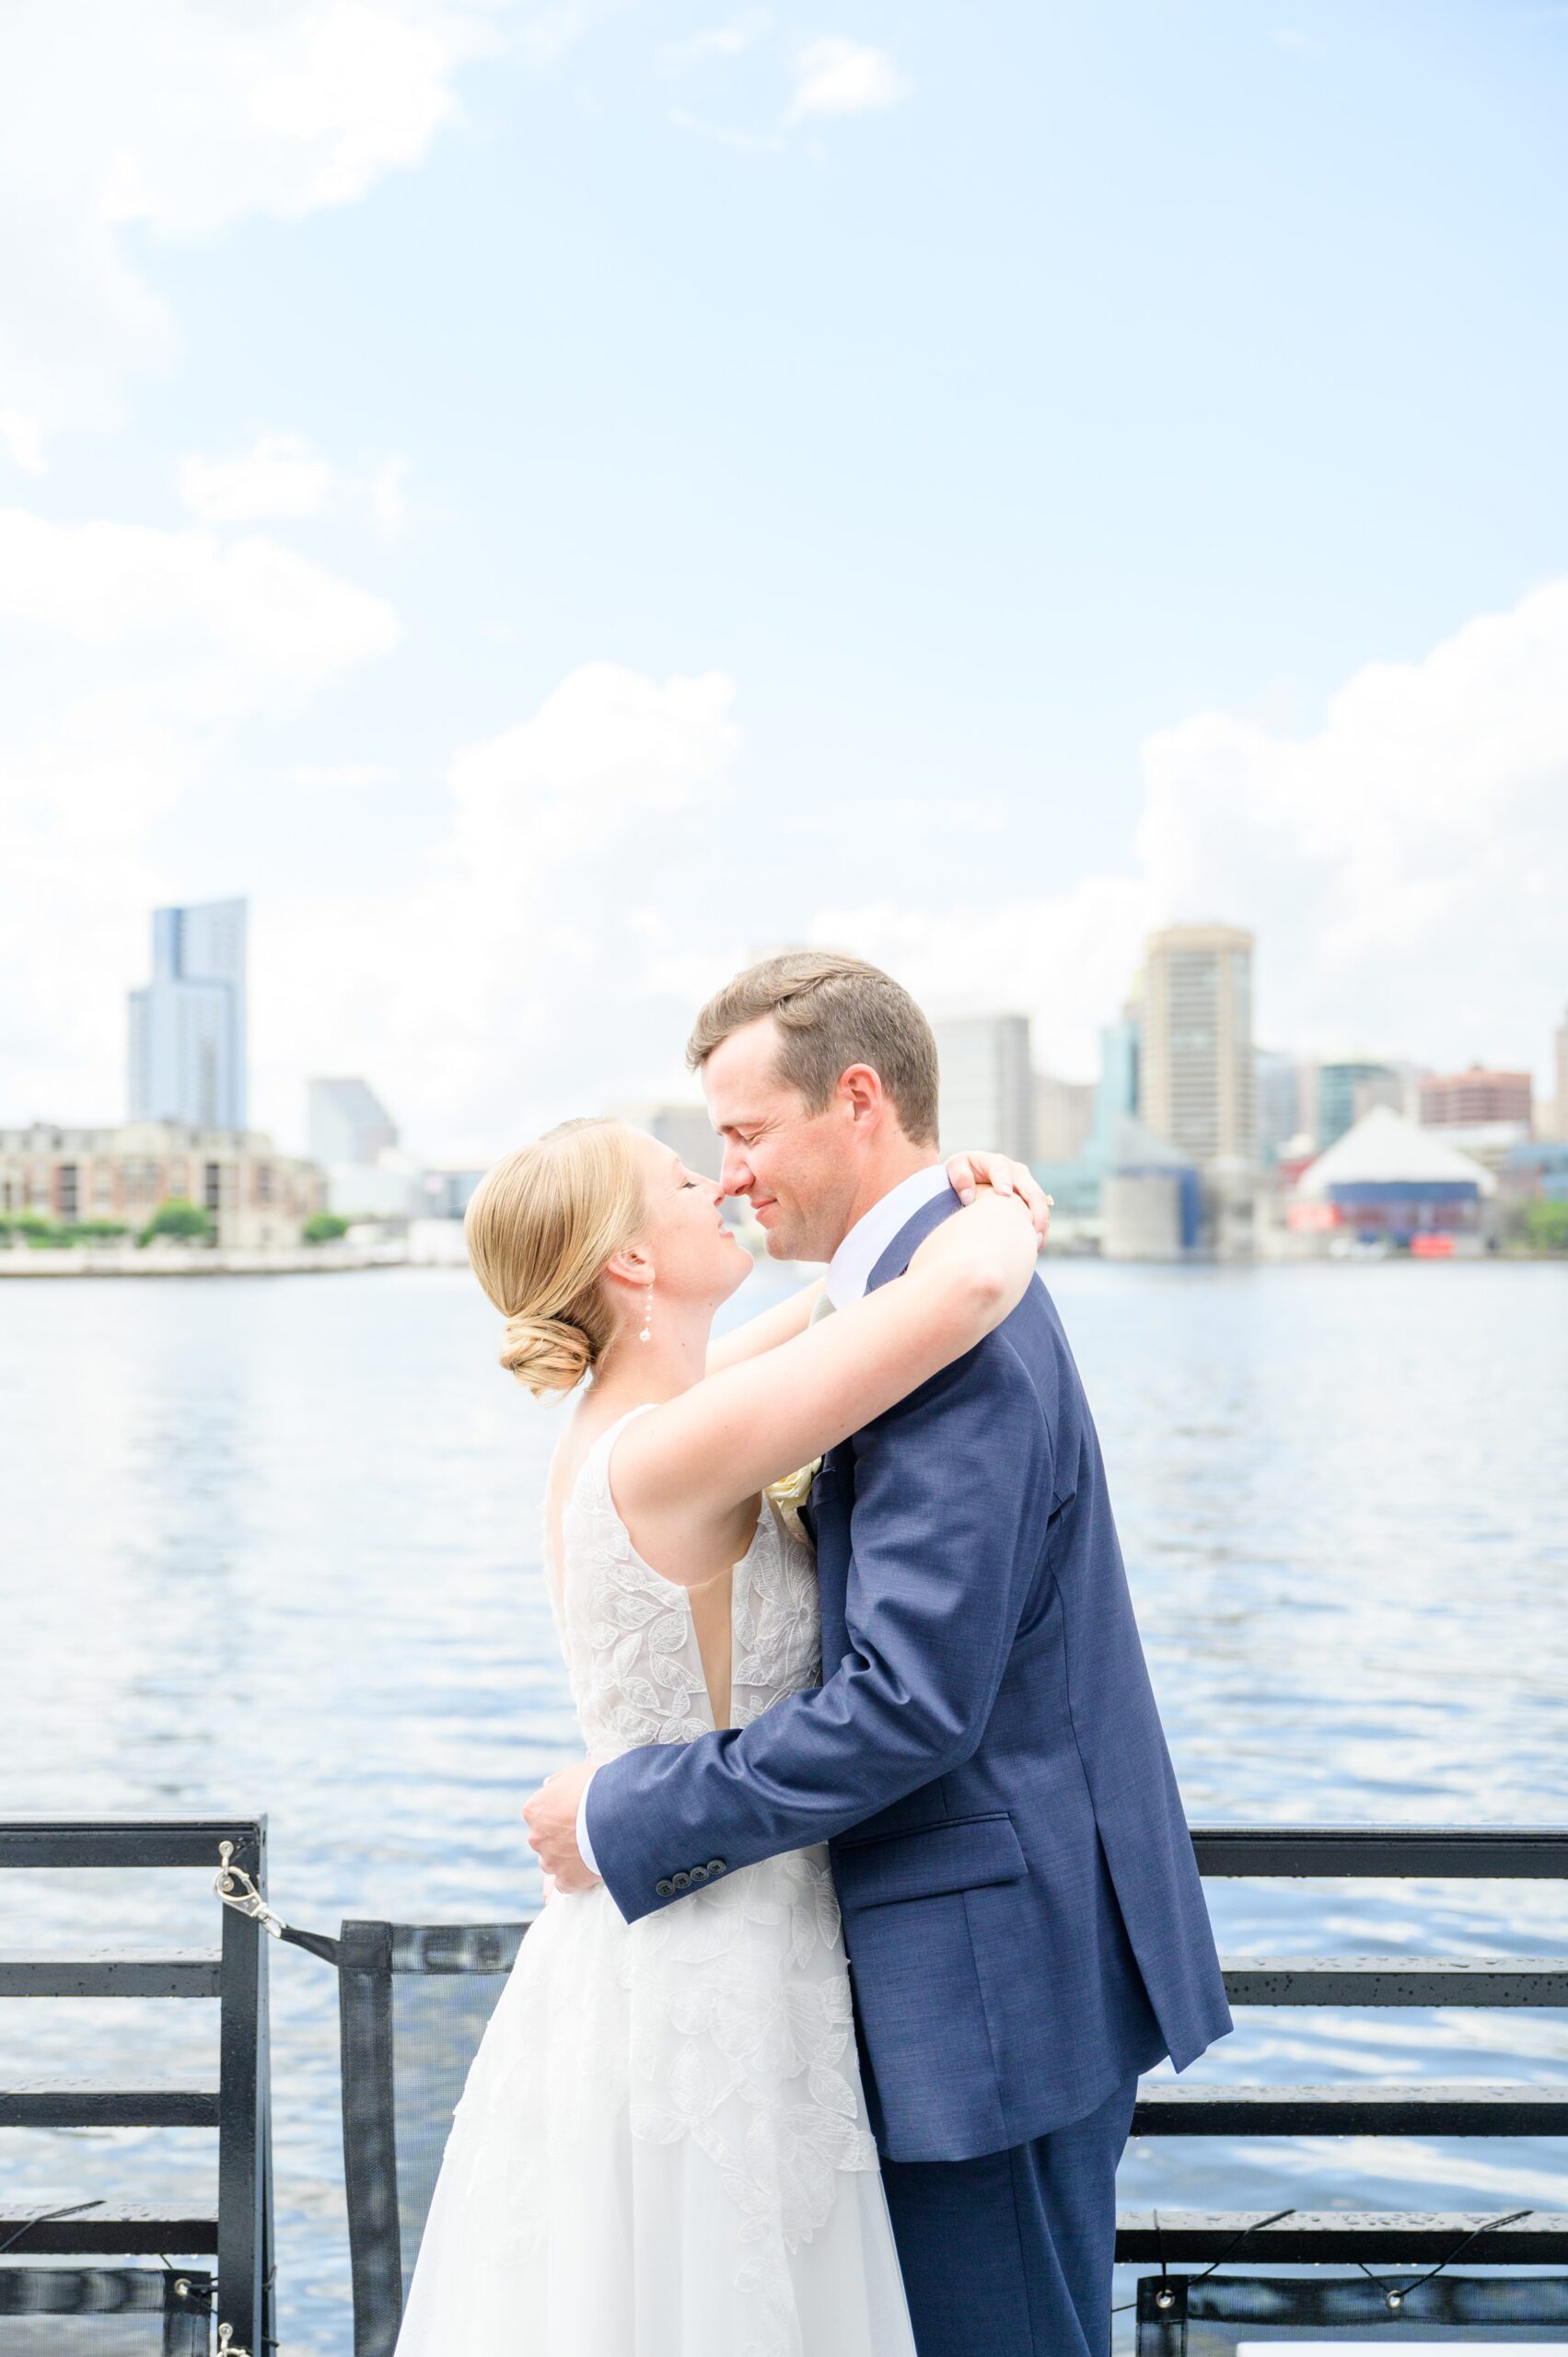 Sage Green and Navy Blue summer wedding at the Frederick Douglass Maritime Museum in Baltimore, Maryland. Photographed by Baltimore Wedding Photographer Cait Kramer Photography